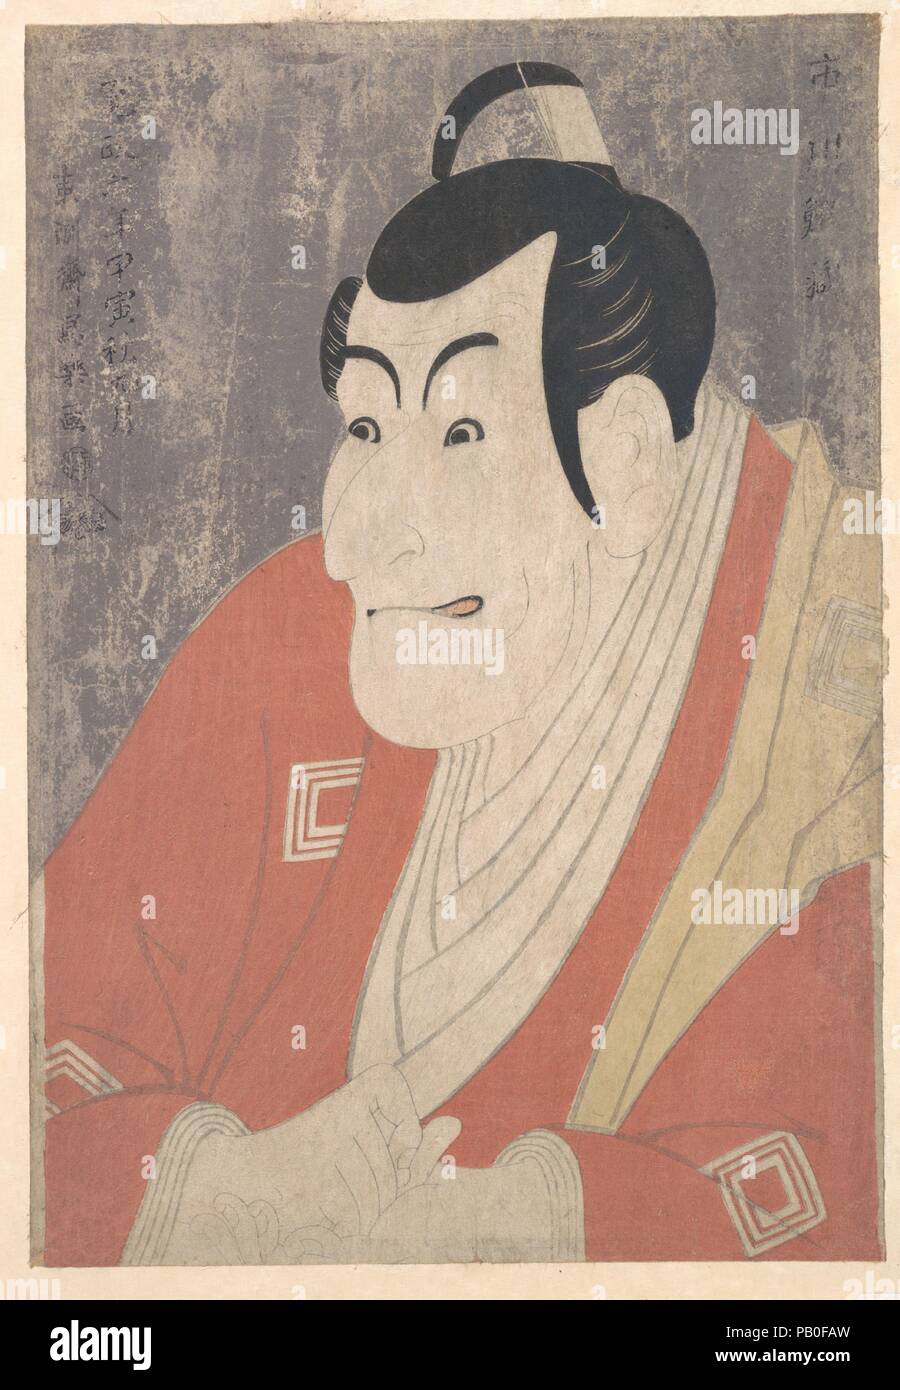 Ichikawa Ebizo IV as Takemura Sadanojo in the Play Koinyobo Somewake Tazuna. Artist: Toshusai Sharaku (Japanese, active 1794-95). Culture: Japan. Dimensions: 14 7/16 x 9 1/3 in. (36.7 x 23.7 cm). Date: 1794.  In this portrait, one of Sharaku's most famous works, Ebizo Is acting the part of a samurai warrior of tremendous integrity at a moment of insufferable moral conflict. Indeed, in the succeeding moment he will commit seppuku, or suicide by disembowelment, to preserve his honor. Ebizo's realization of his inescapable fate is apparent in his hands, which are clenched with enormous tension, w Stock Photo